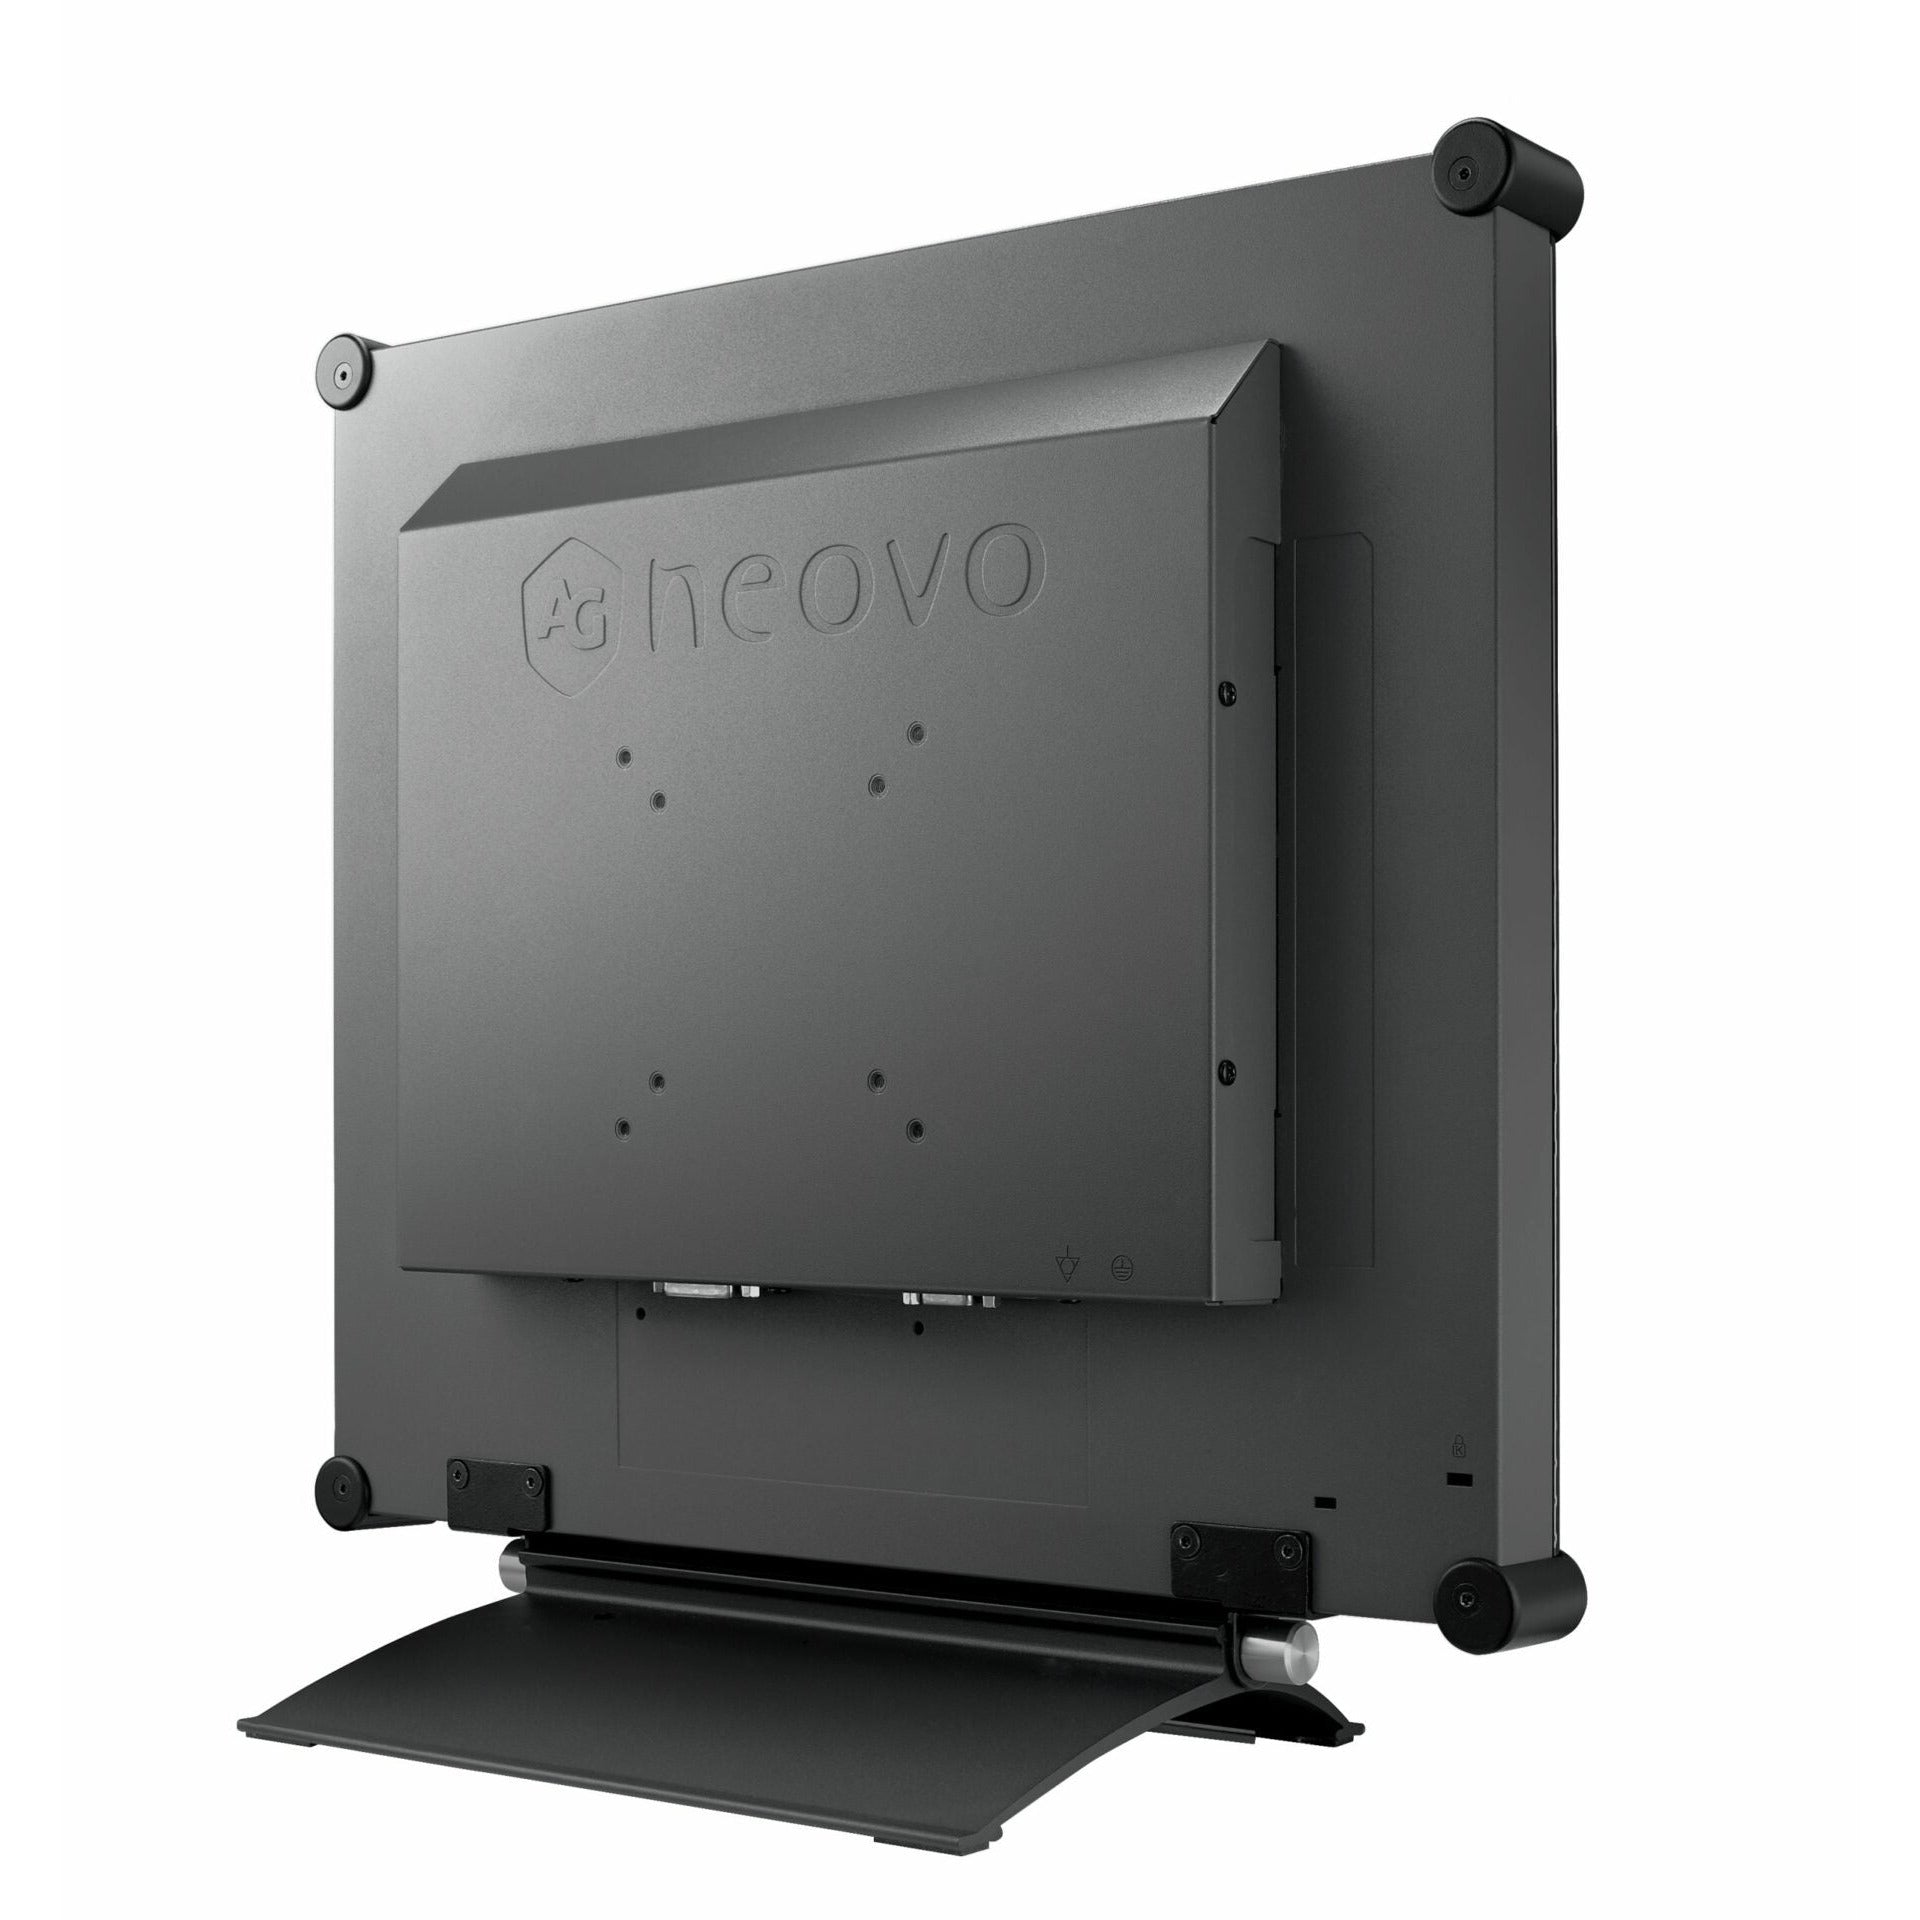 AG Neovo X-17E 17-Inch 5:4 Semi-Industrial Monitor With Metal Casing